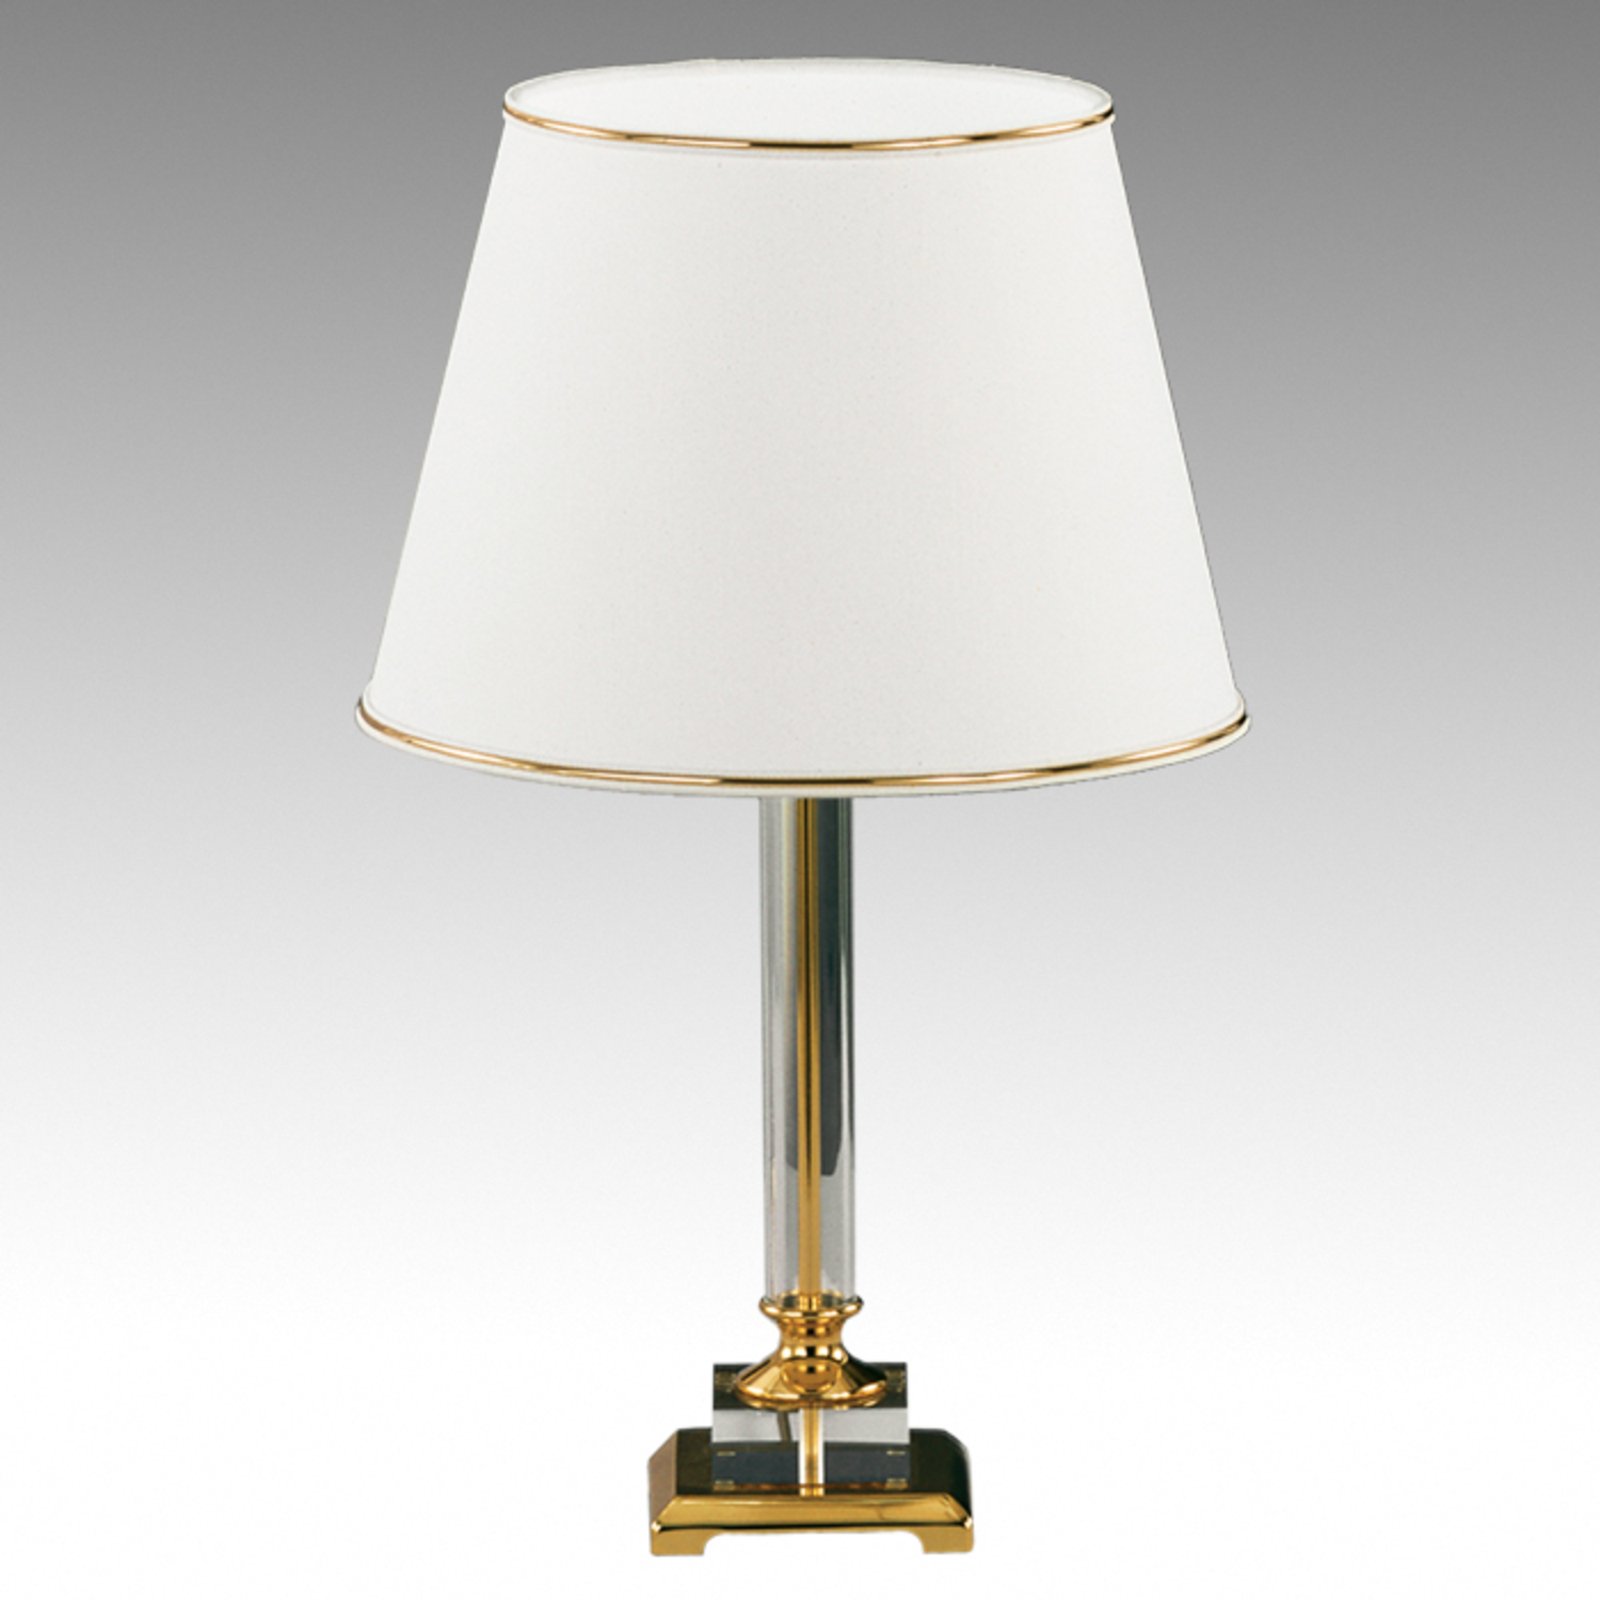 Elegant Table Lamp Queen From Knapstein, Versace Table Lamps Uk